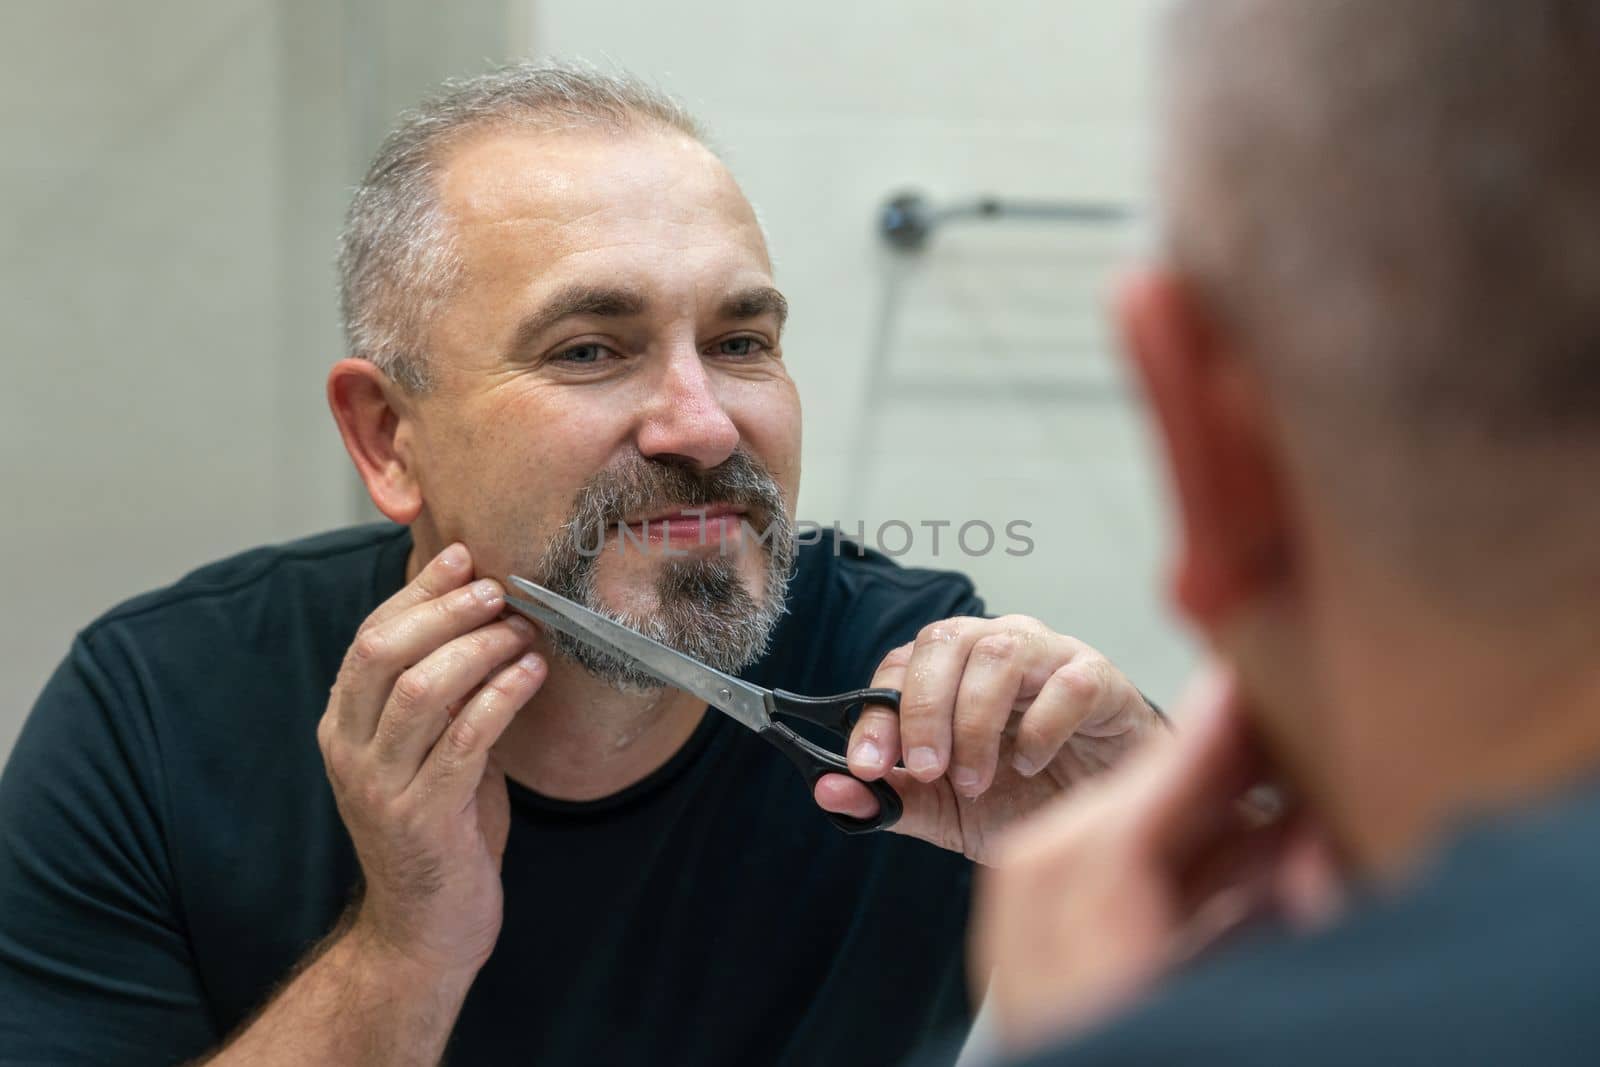 Portrait of Middle-aged handsome man cutting his beard and mooustache with scissors by Mariakray